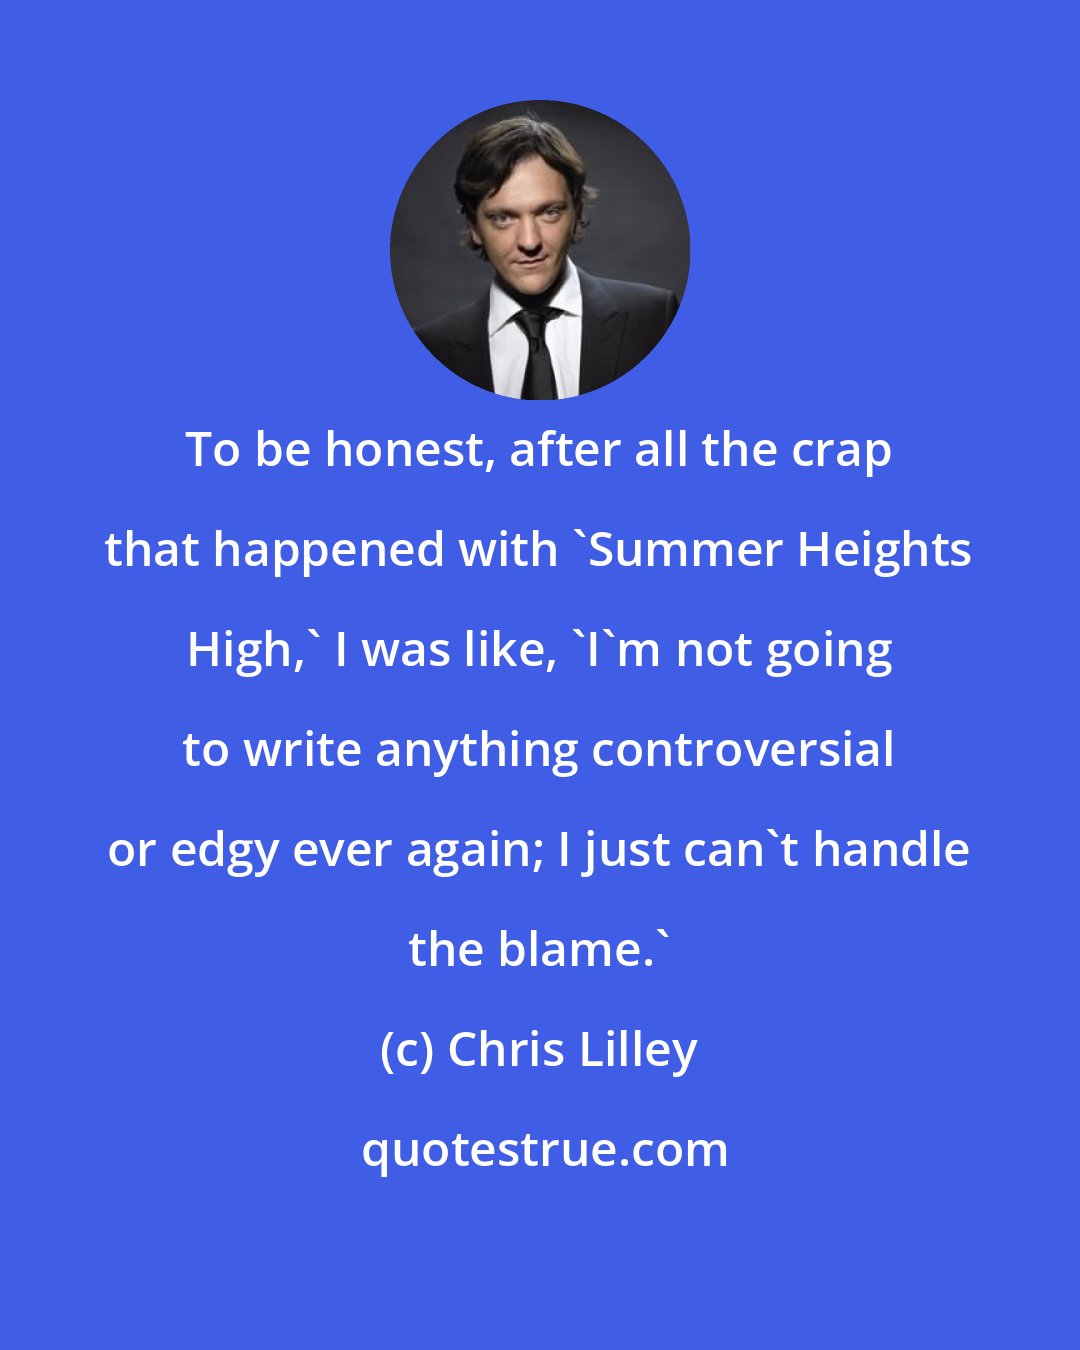 Chris Lilley: To be honest, after all the crap that happened with 'Summer Heights High,' I was like, 'I'm not going to write anything controversial or edgy ever again; I just can't handle the blame.'